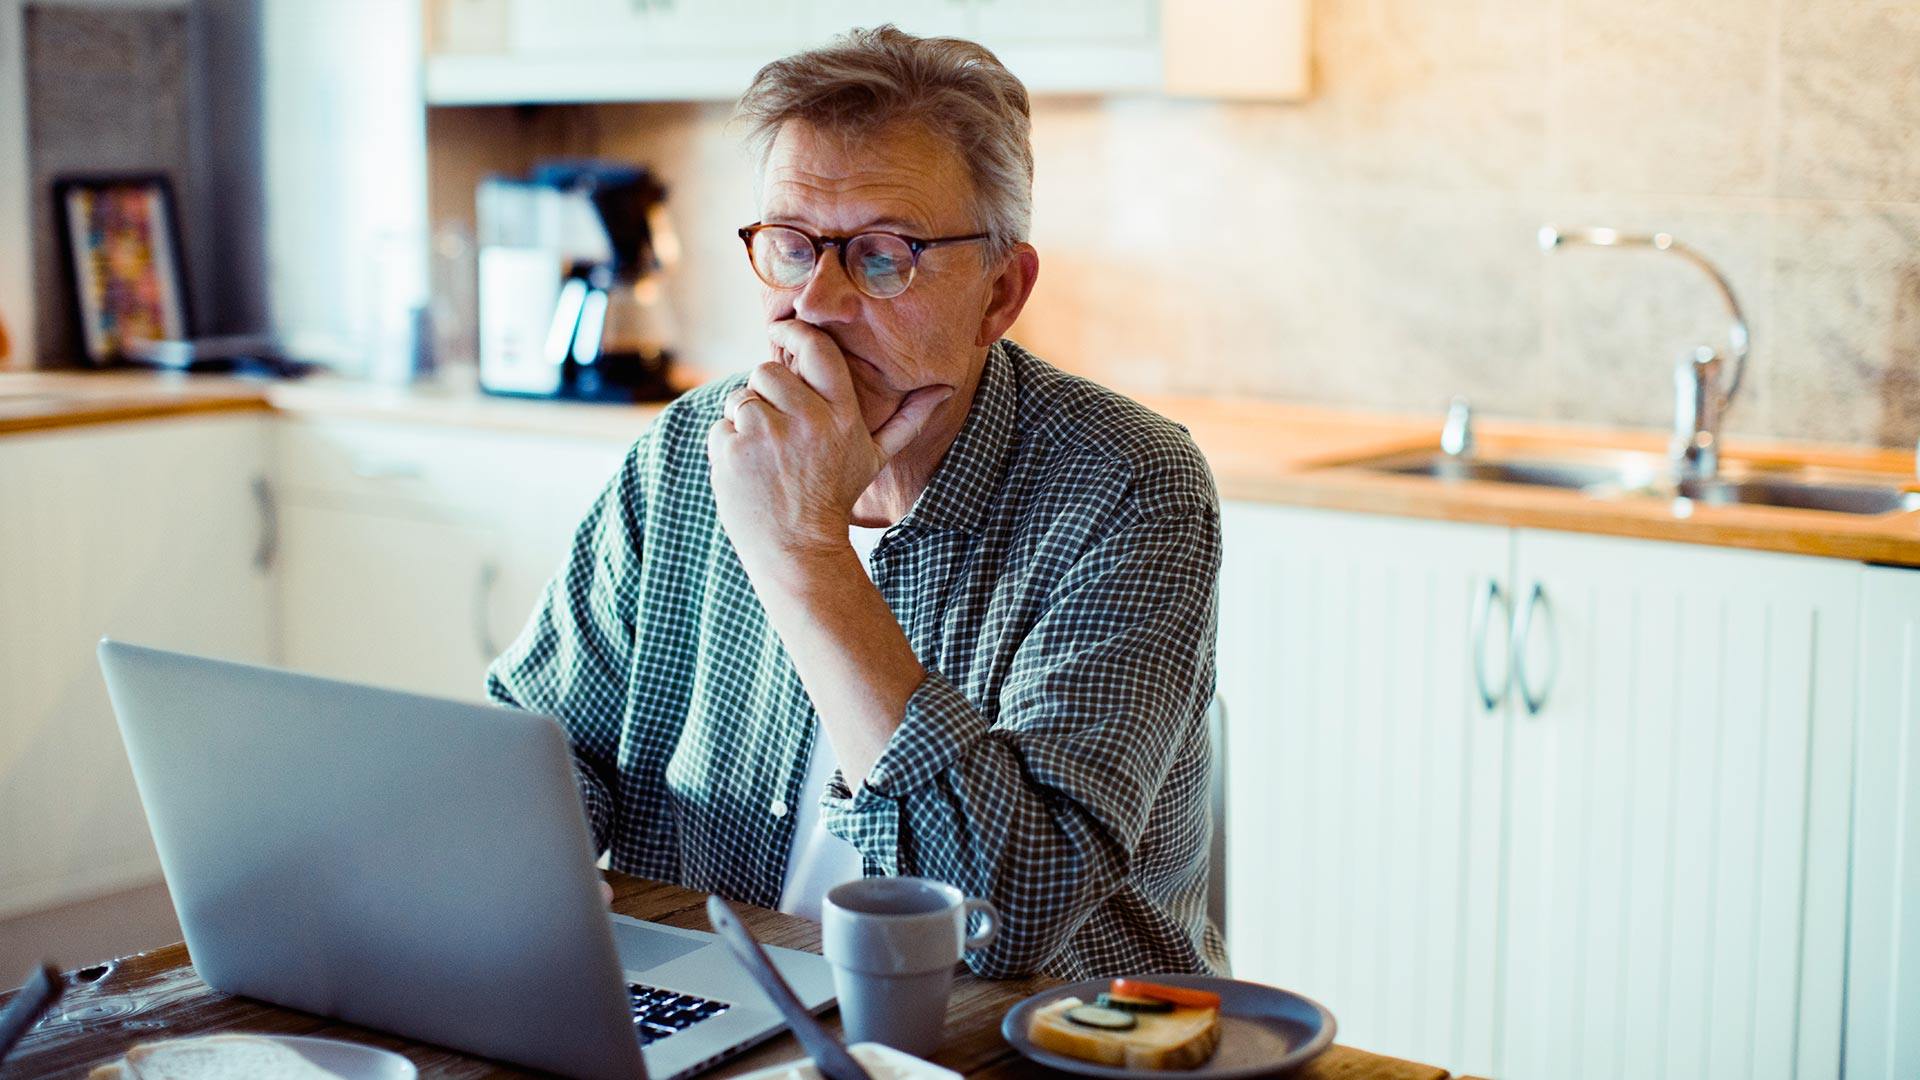 Close up of a mature man using a laptop at home while having breakfast